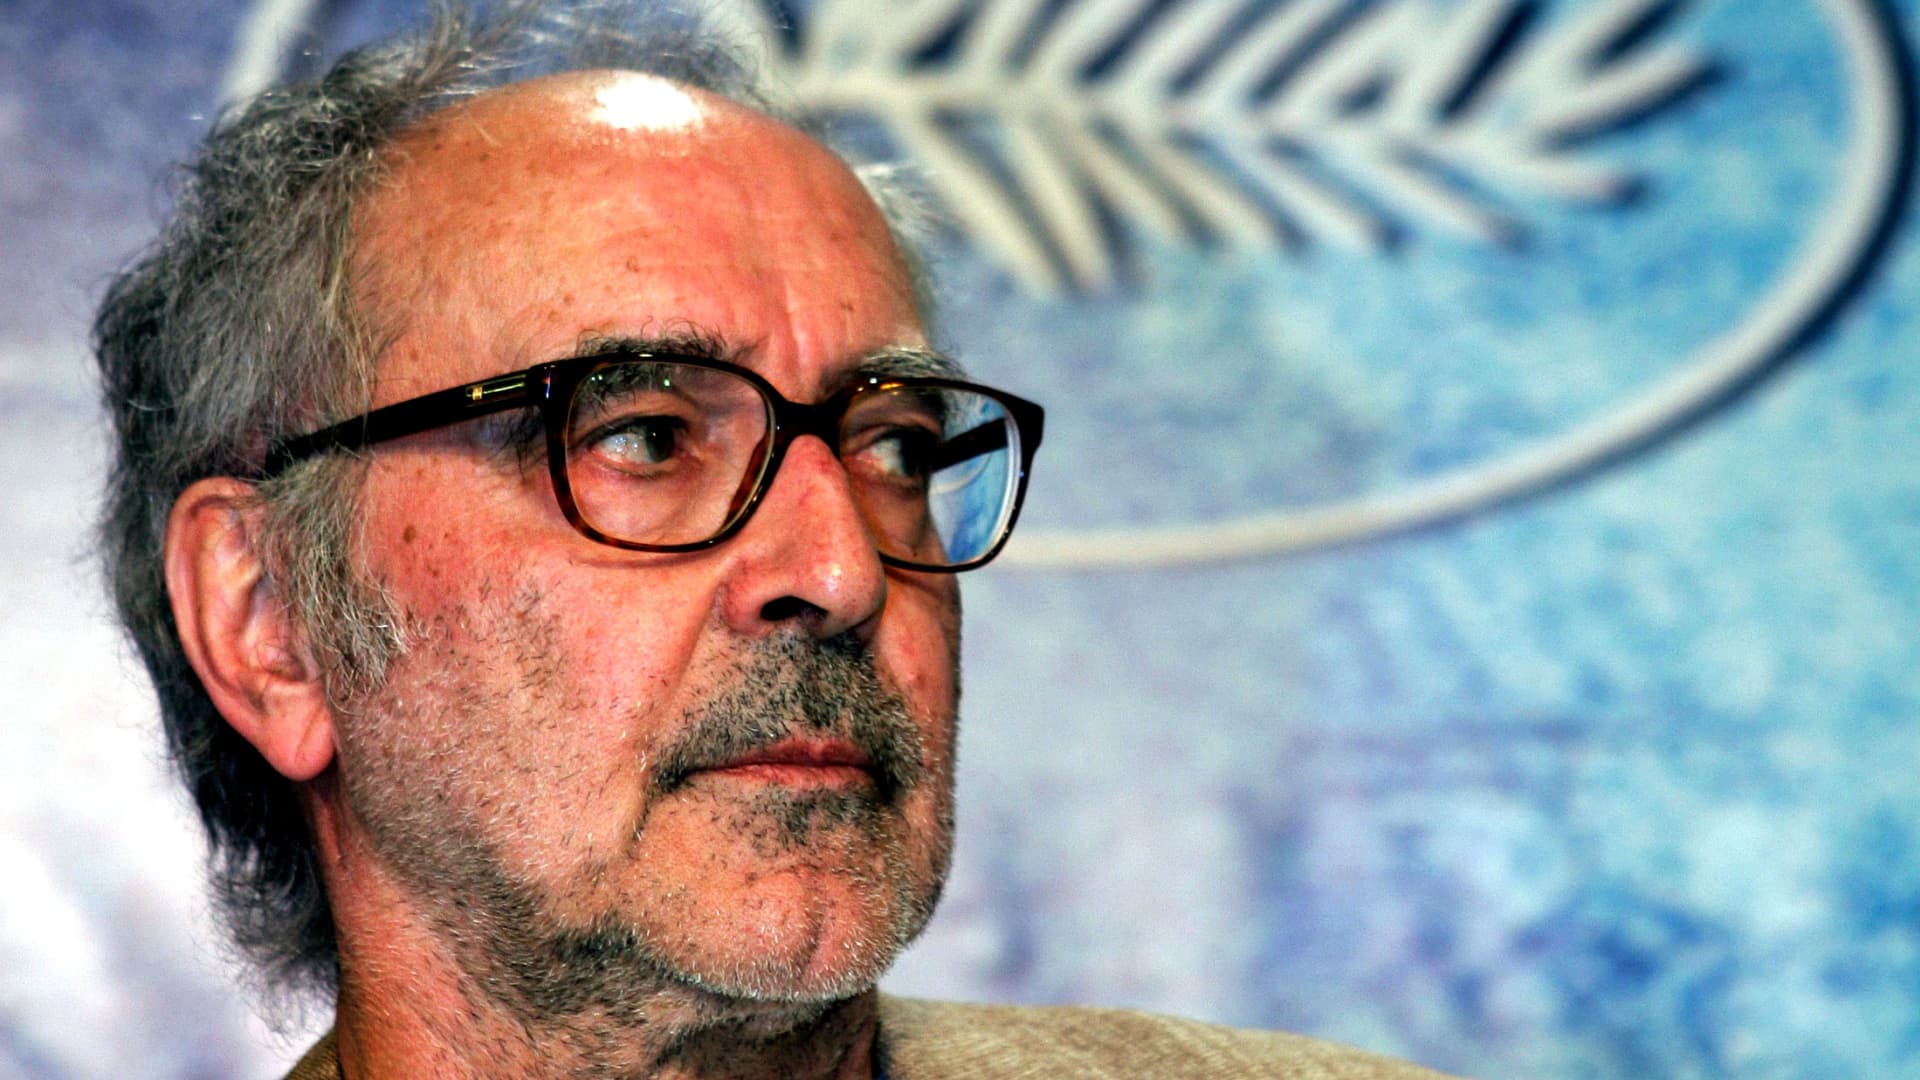 Jean-Luc Godard, daring French New Wave director, dies at 91